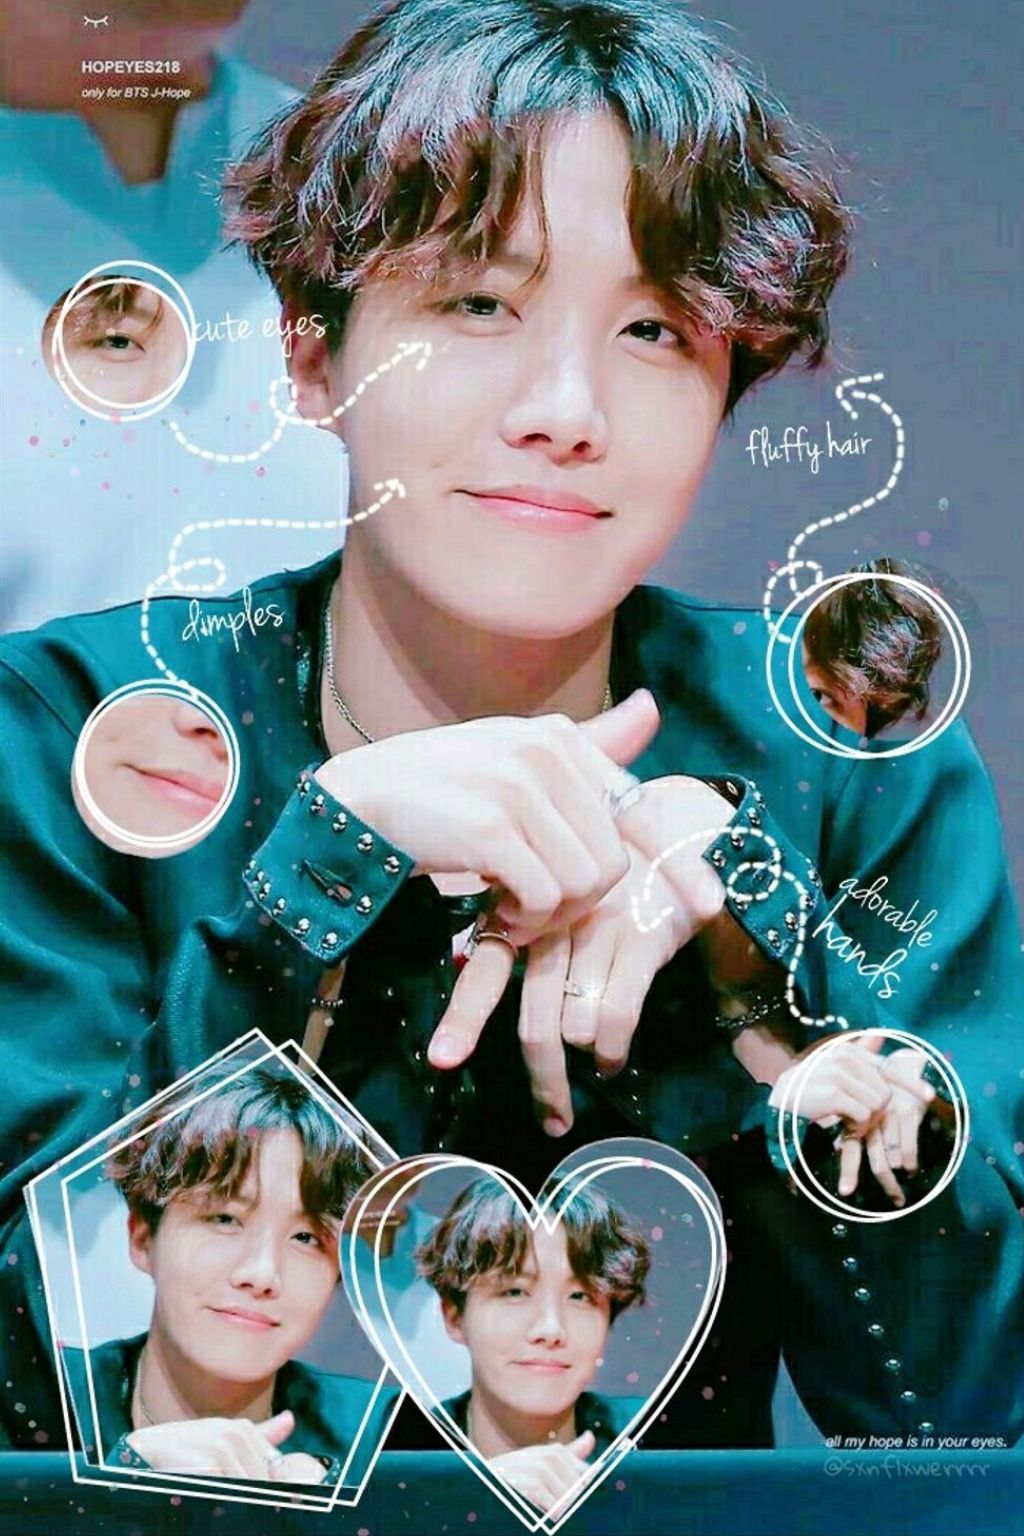 Anatomy Edits That Will Inspire You To Be A Better Stan. Jhope